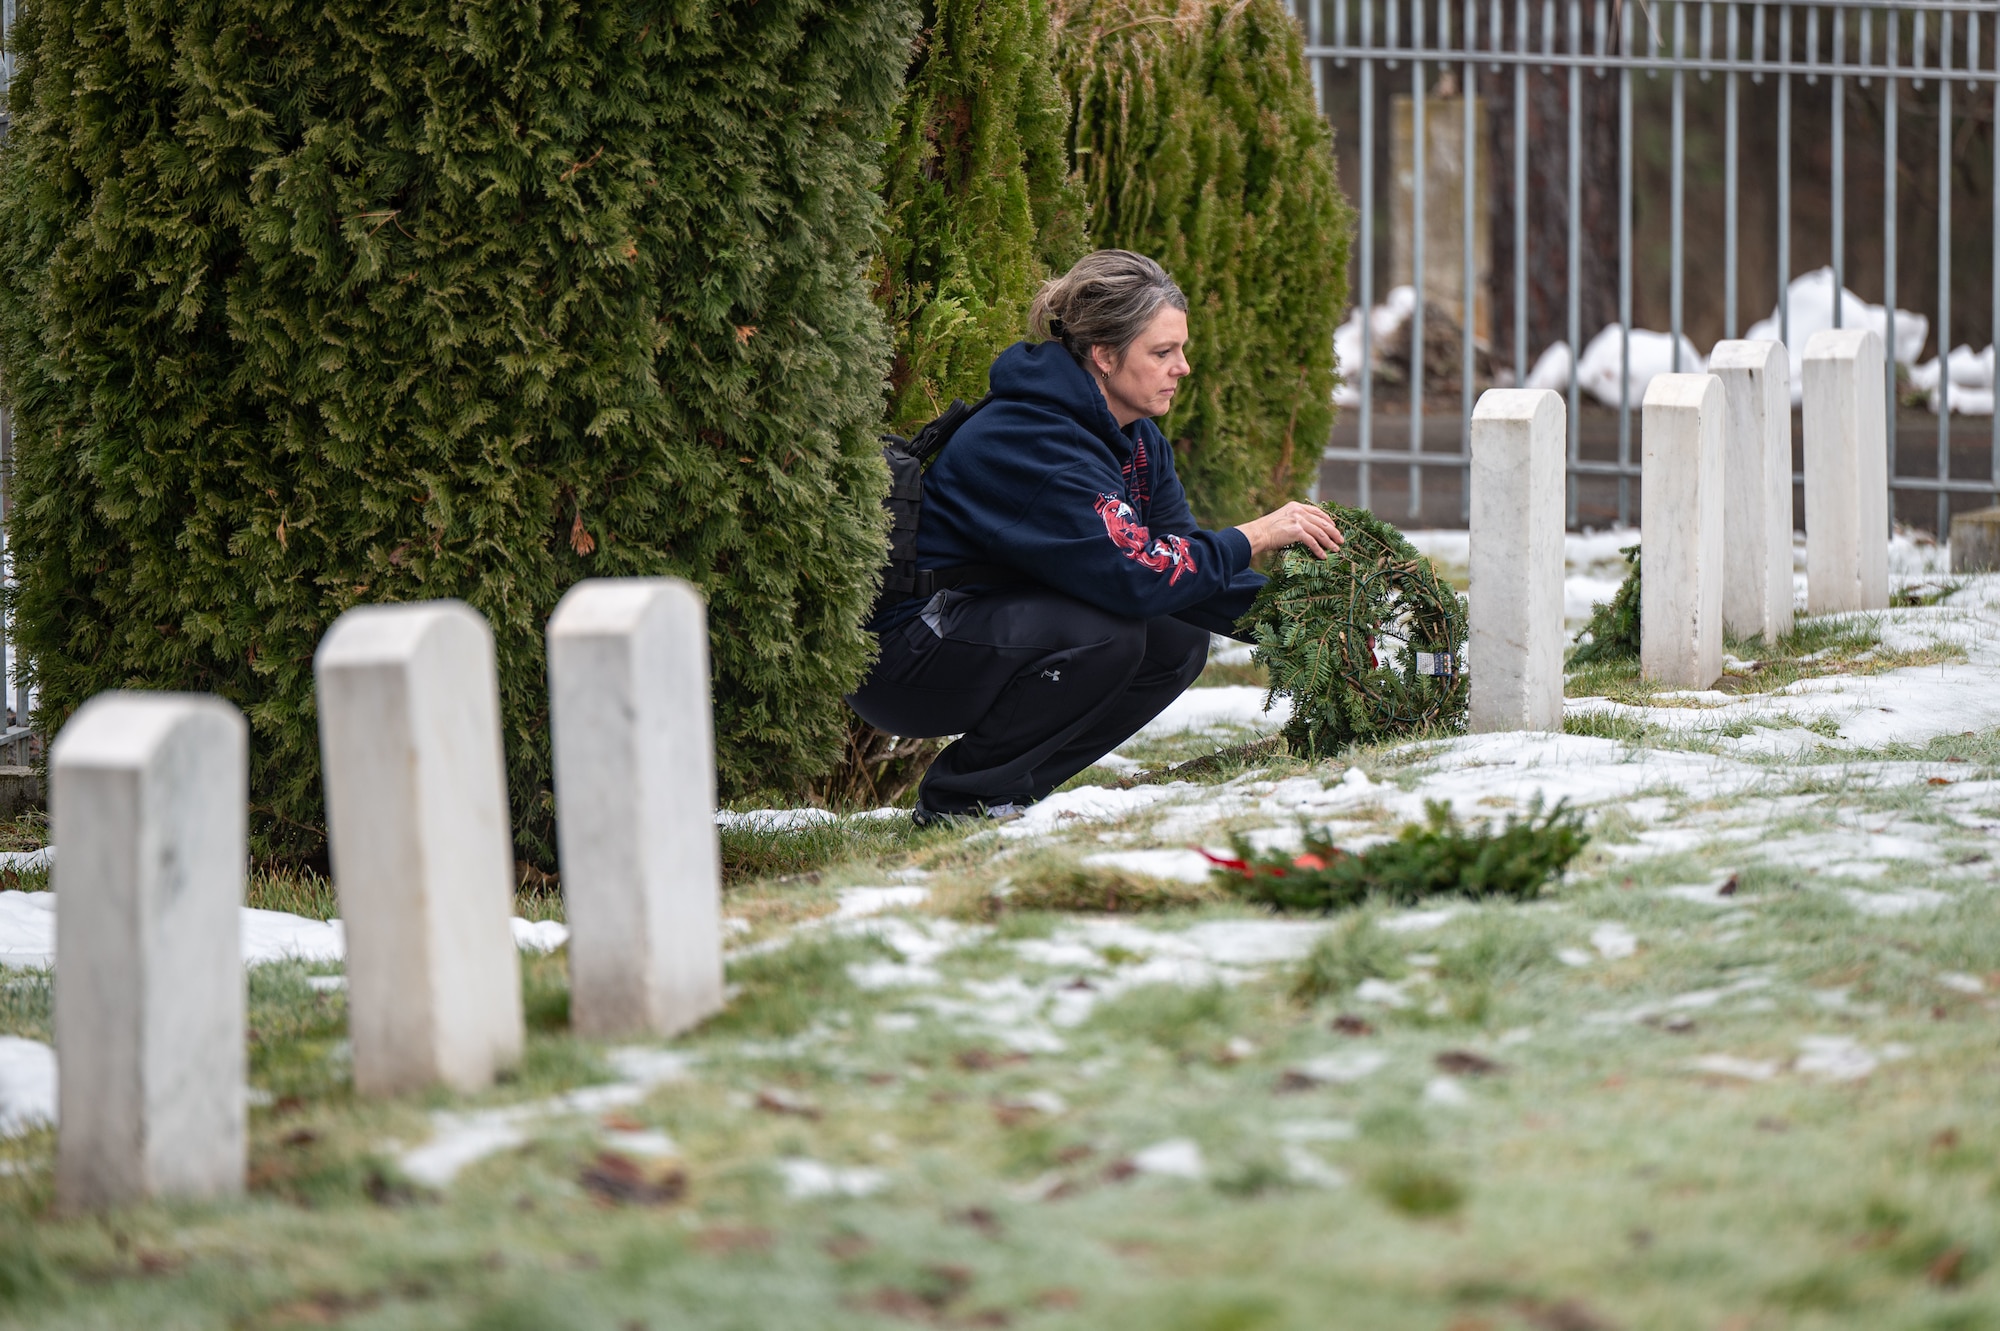 A woman laying a wreath on a gravestone